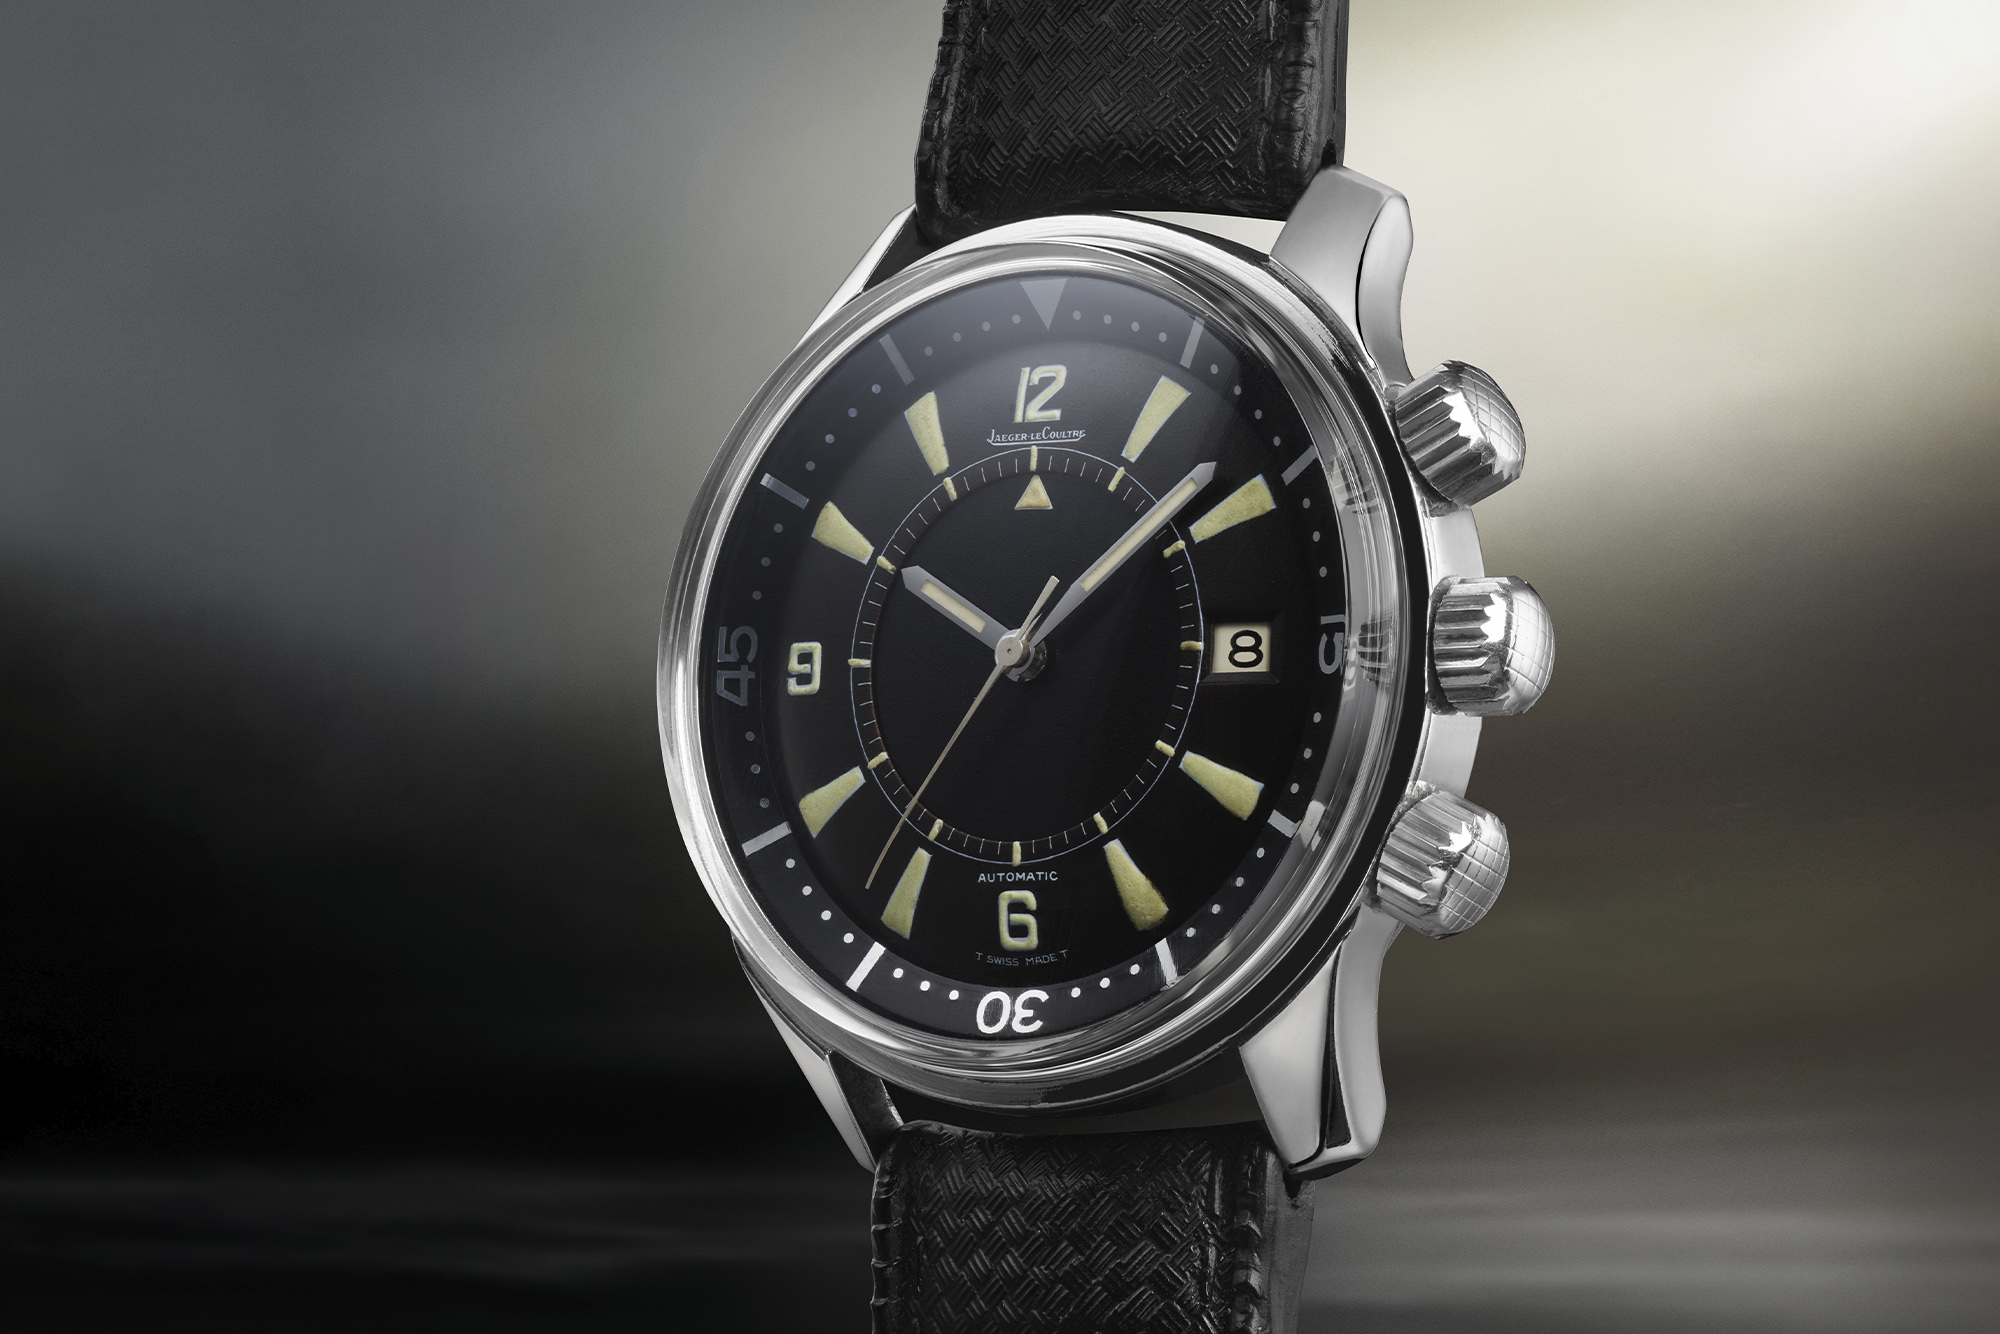 Jaeger-LeCoultre watch black dial and steel rim